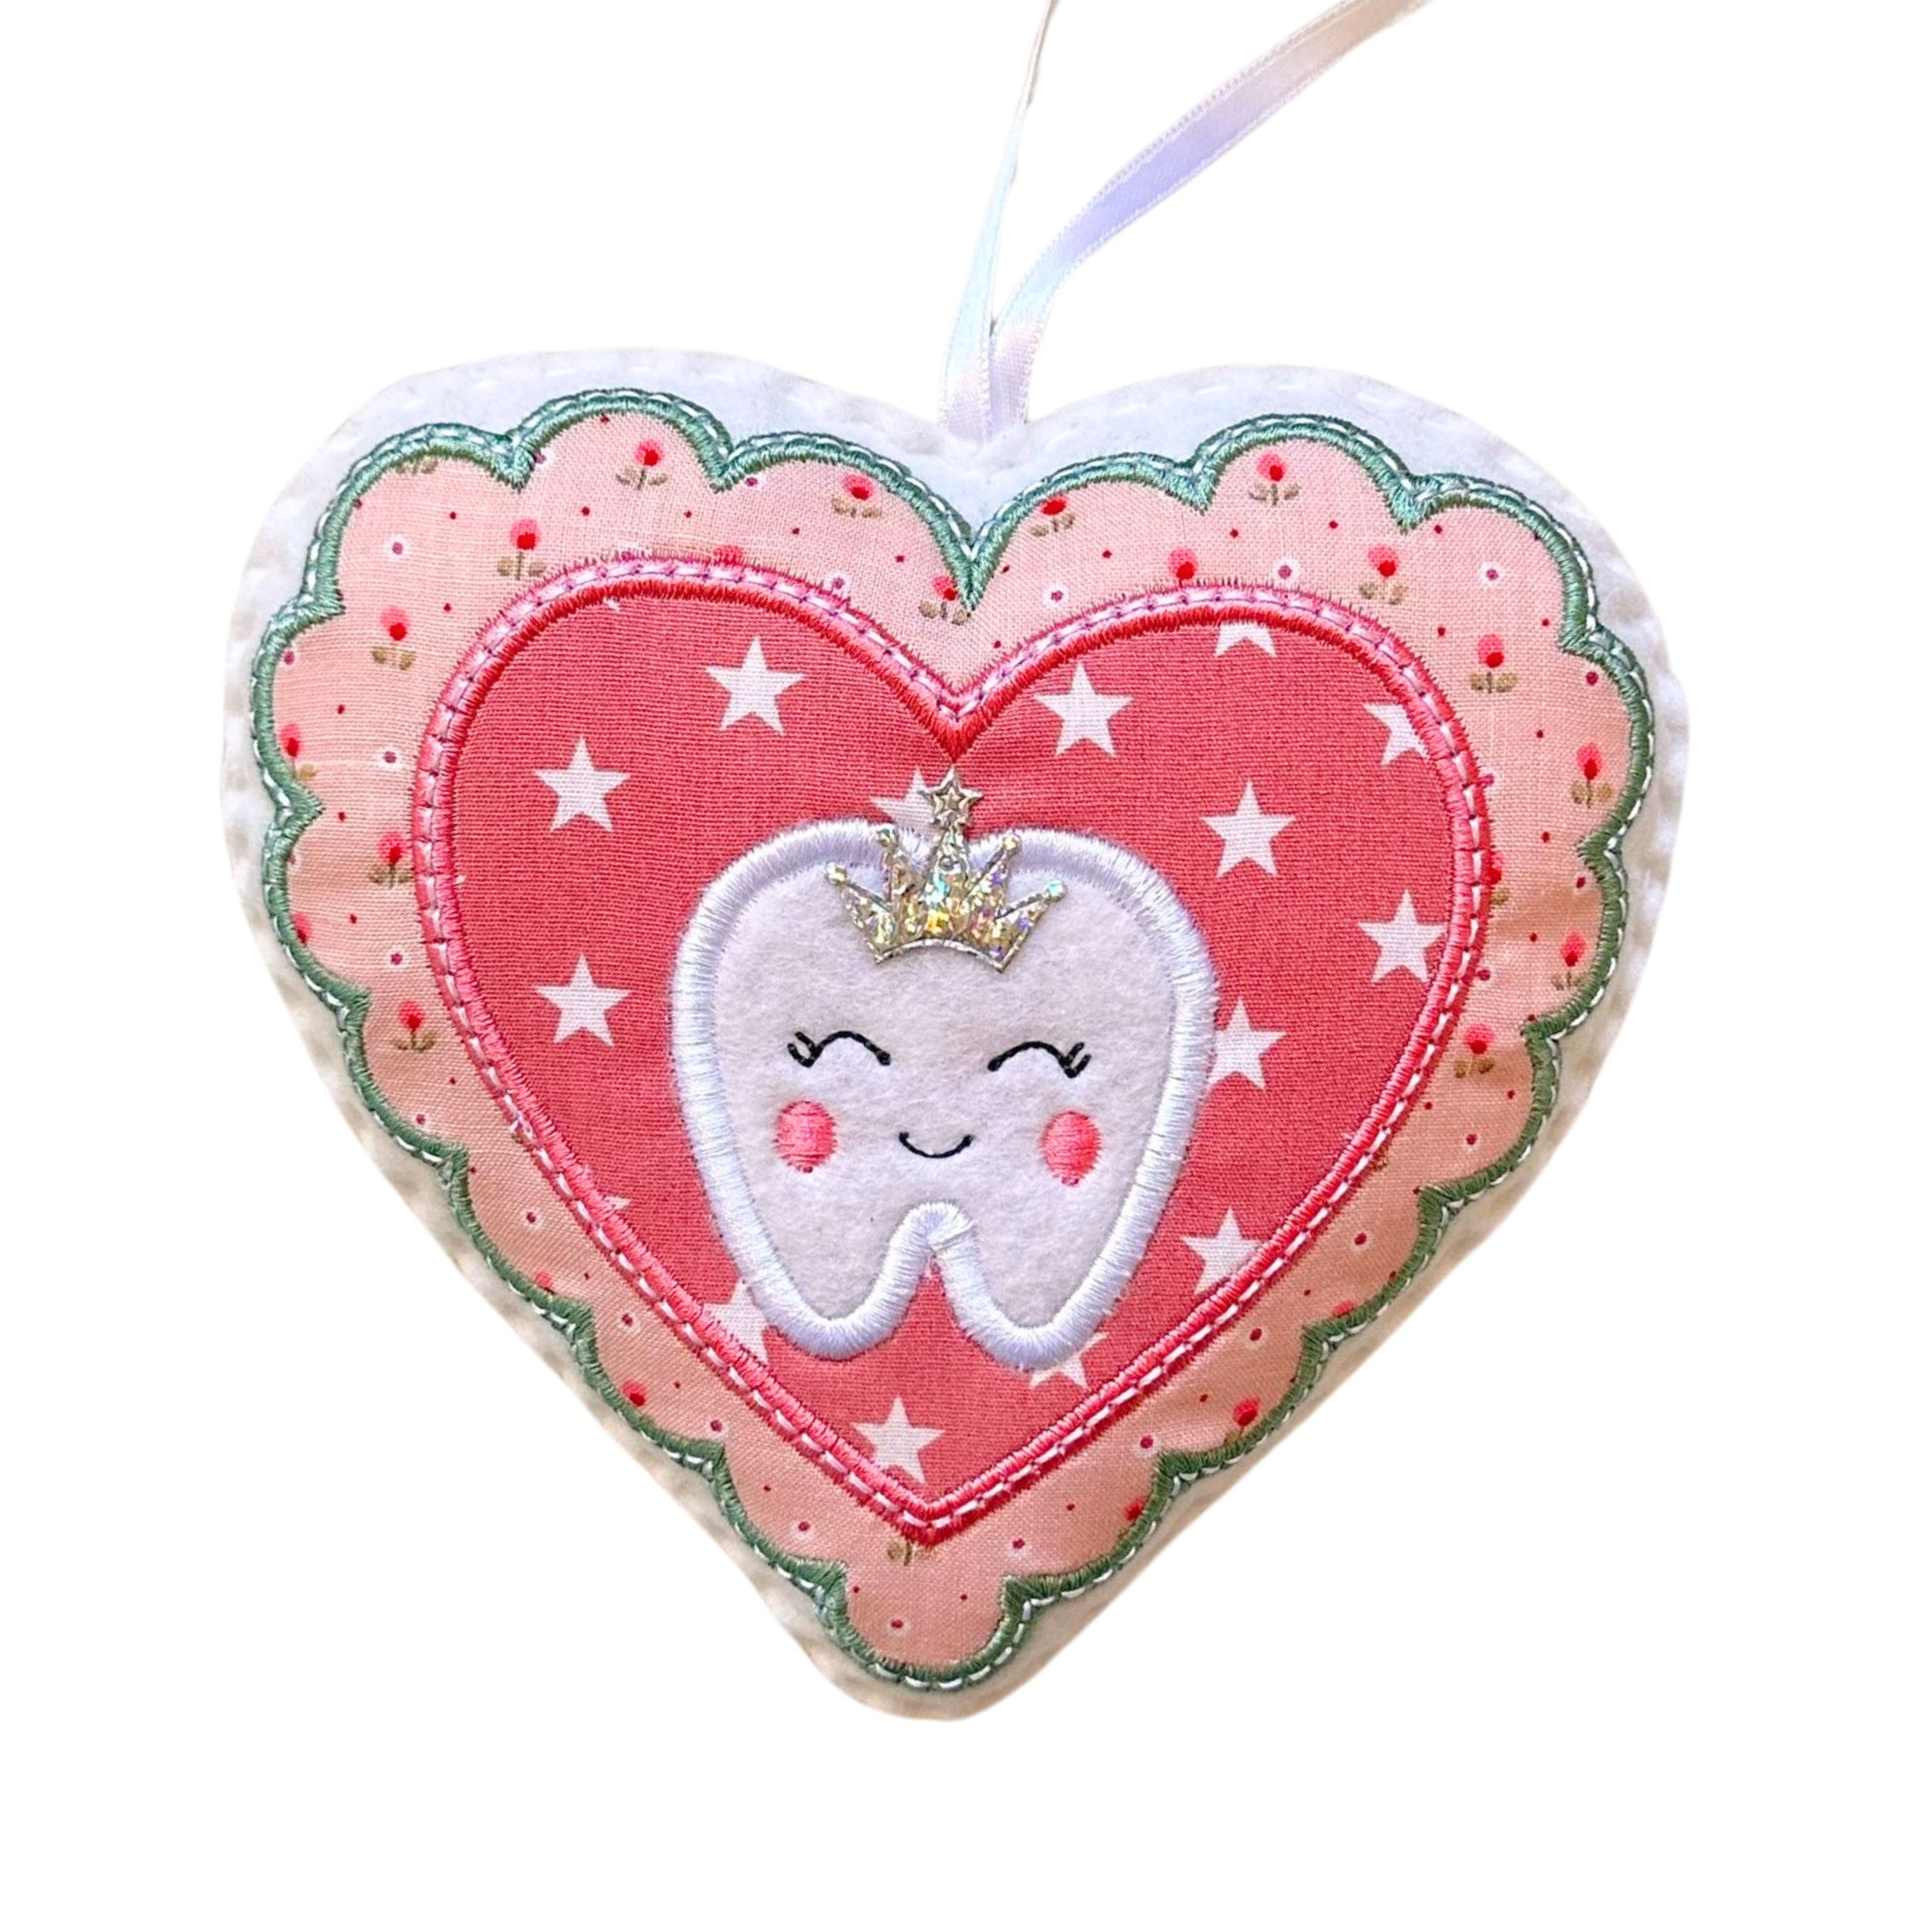 Personalized Tooth Fairy Heart Pillow 